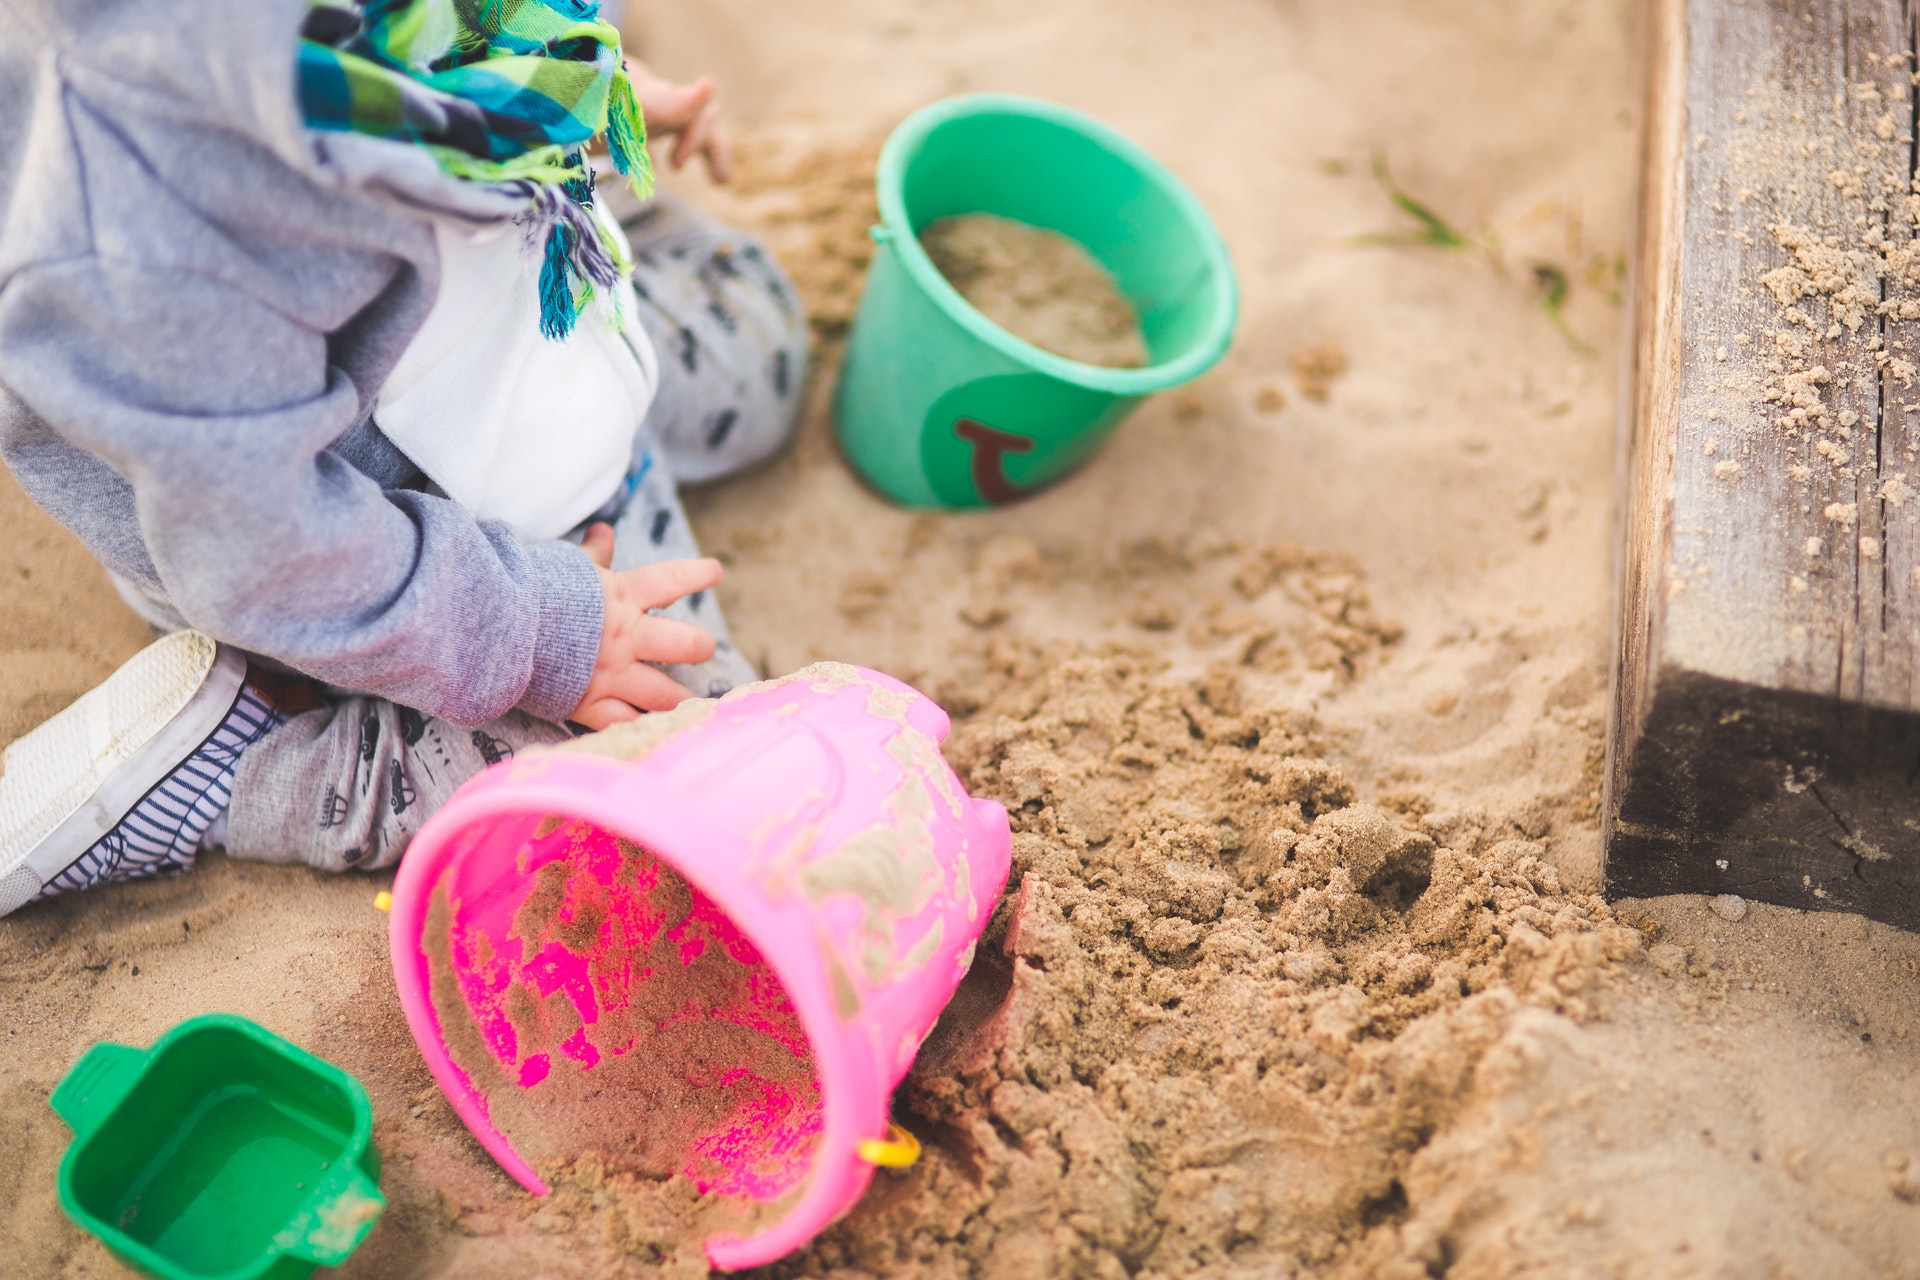 A toddler playing in the sandpit